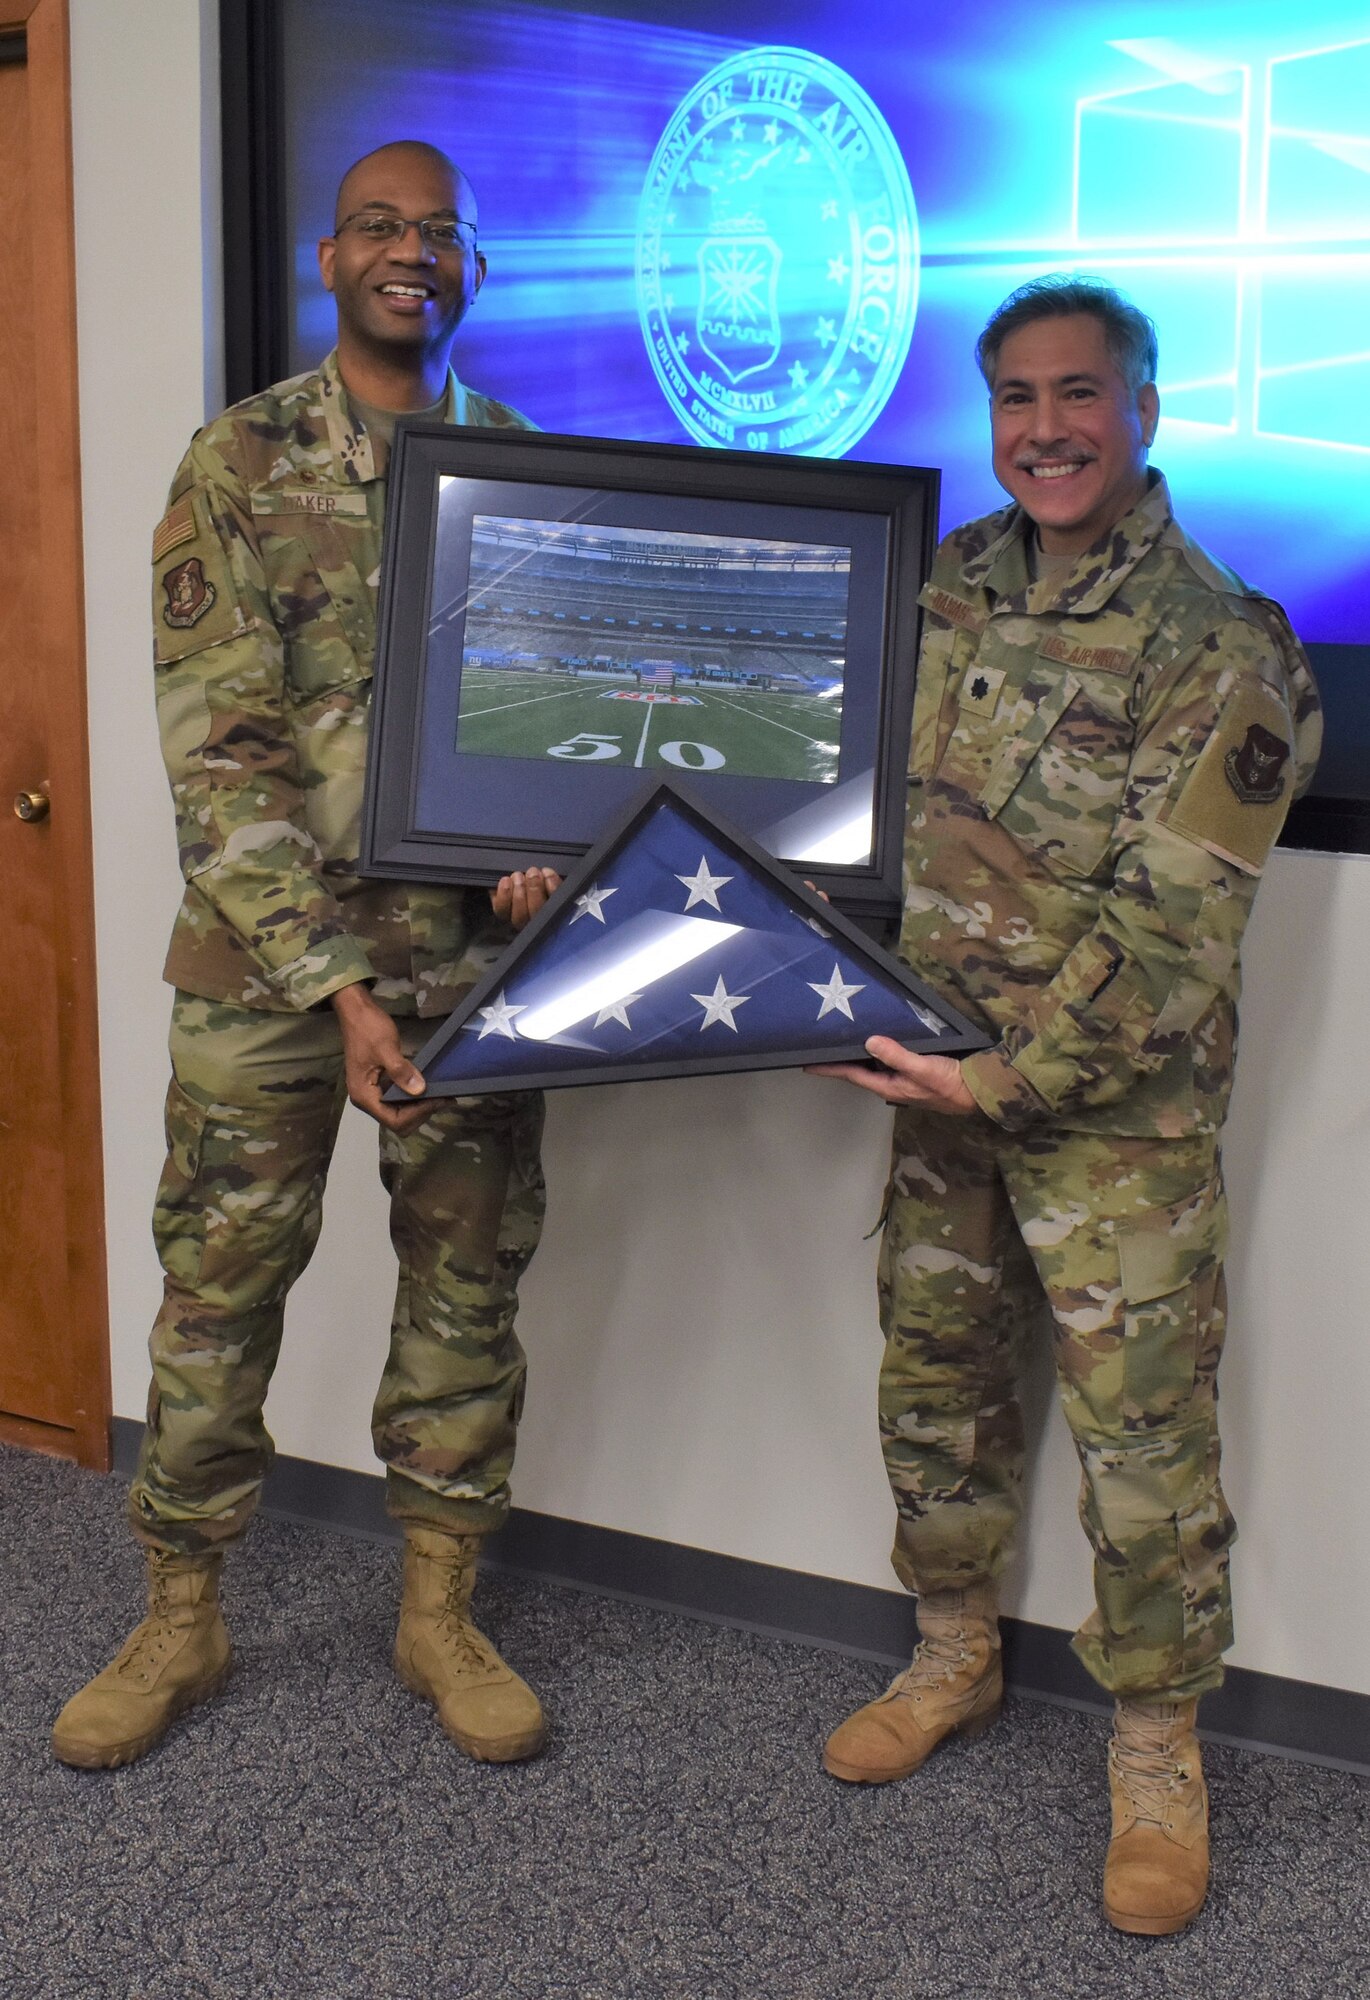 Col. Ricardo Baker, 655th Intelligence, Surveillance, and Reconnaissance Group commander, presents Lt. Col. Thomas Danas, 655th ISR Group deputy commander, a flag and framed photo during his retirement ceremony Dec. 5, 2020. Danas has held multiple positions within the enterprise since 2013 with both the 16 Intelligence Squadron and 655 ISRG and is retiring after more than 41 years of service; over 20 years enlisted and over 20 years as an officer.